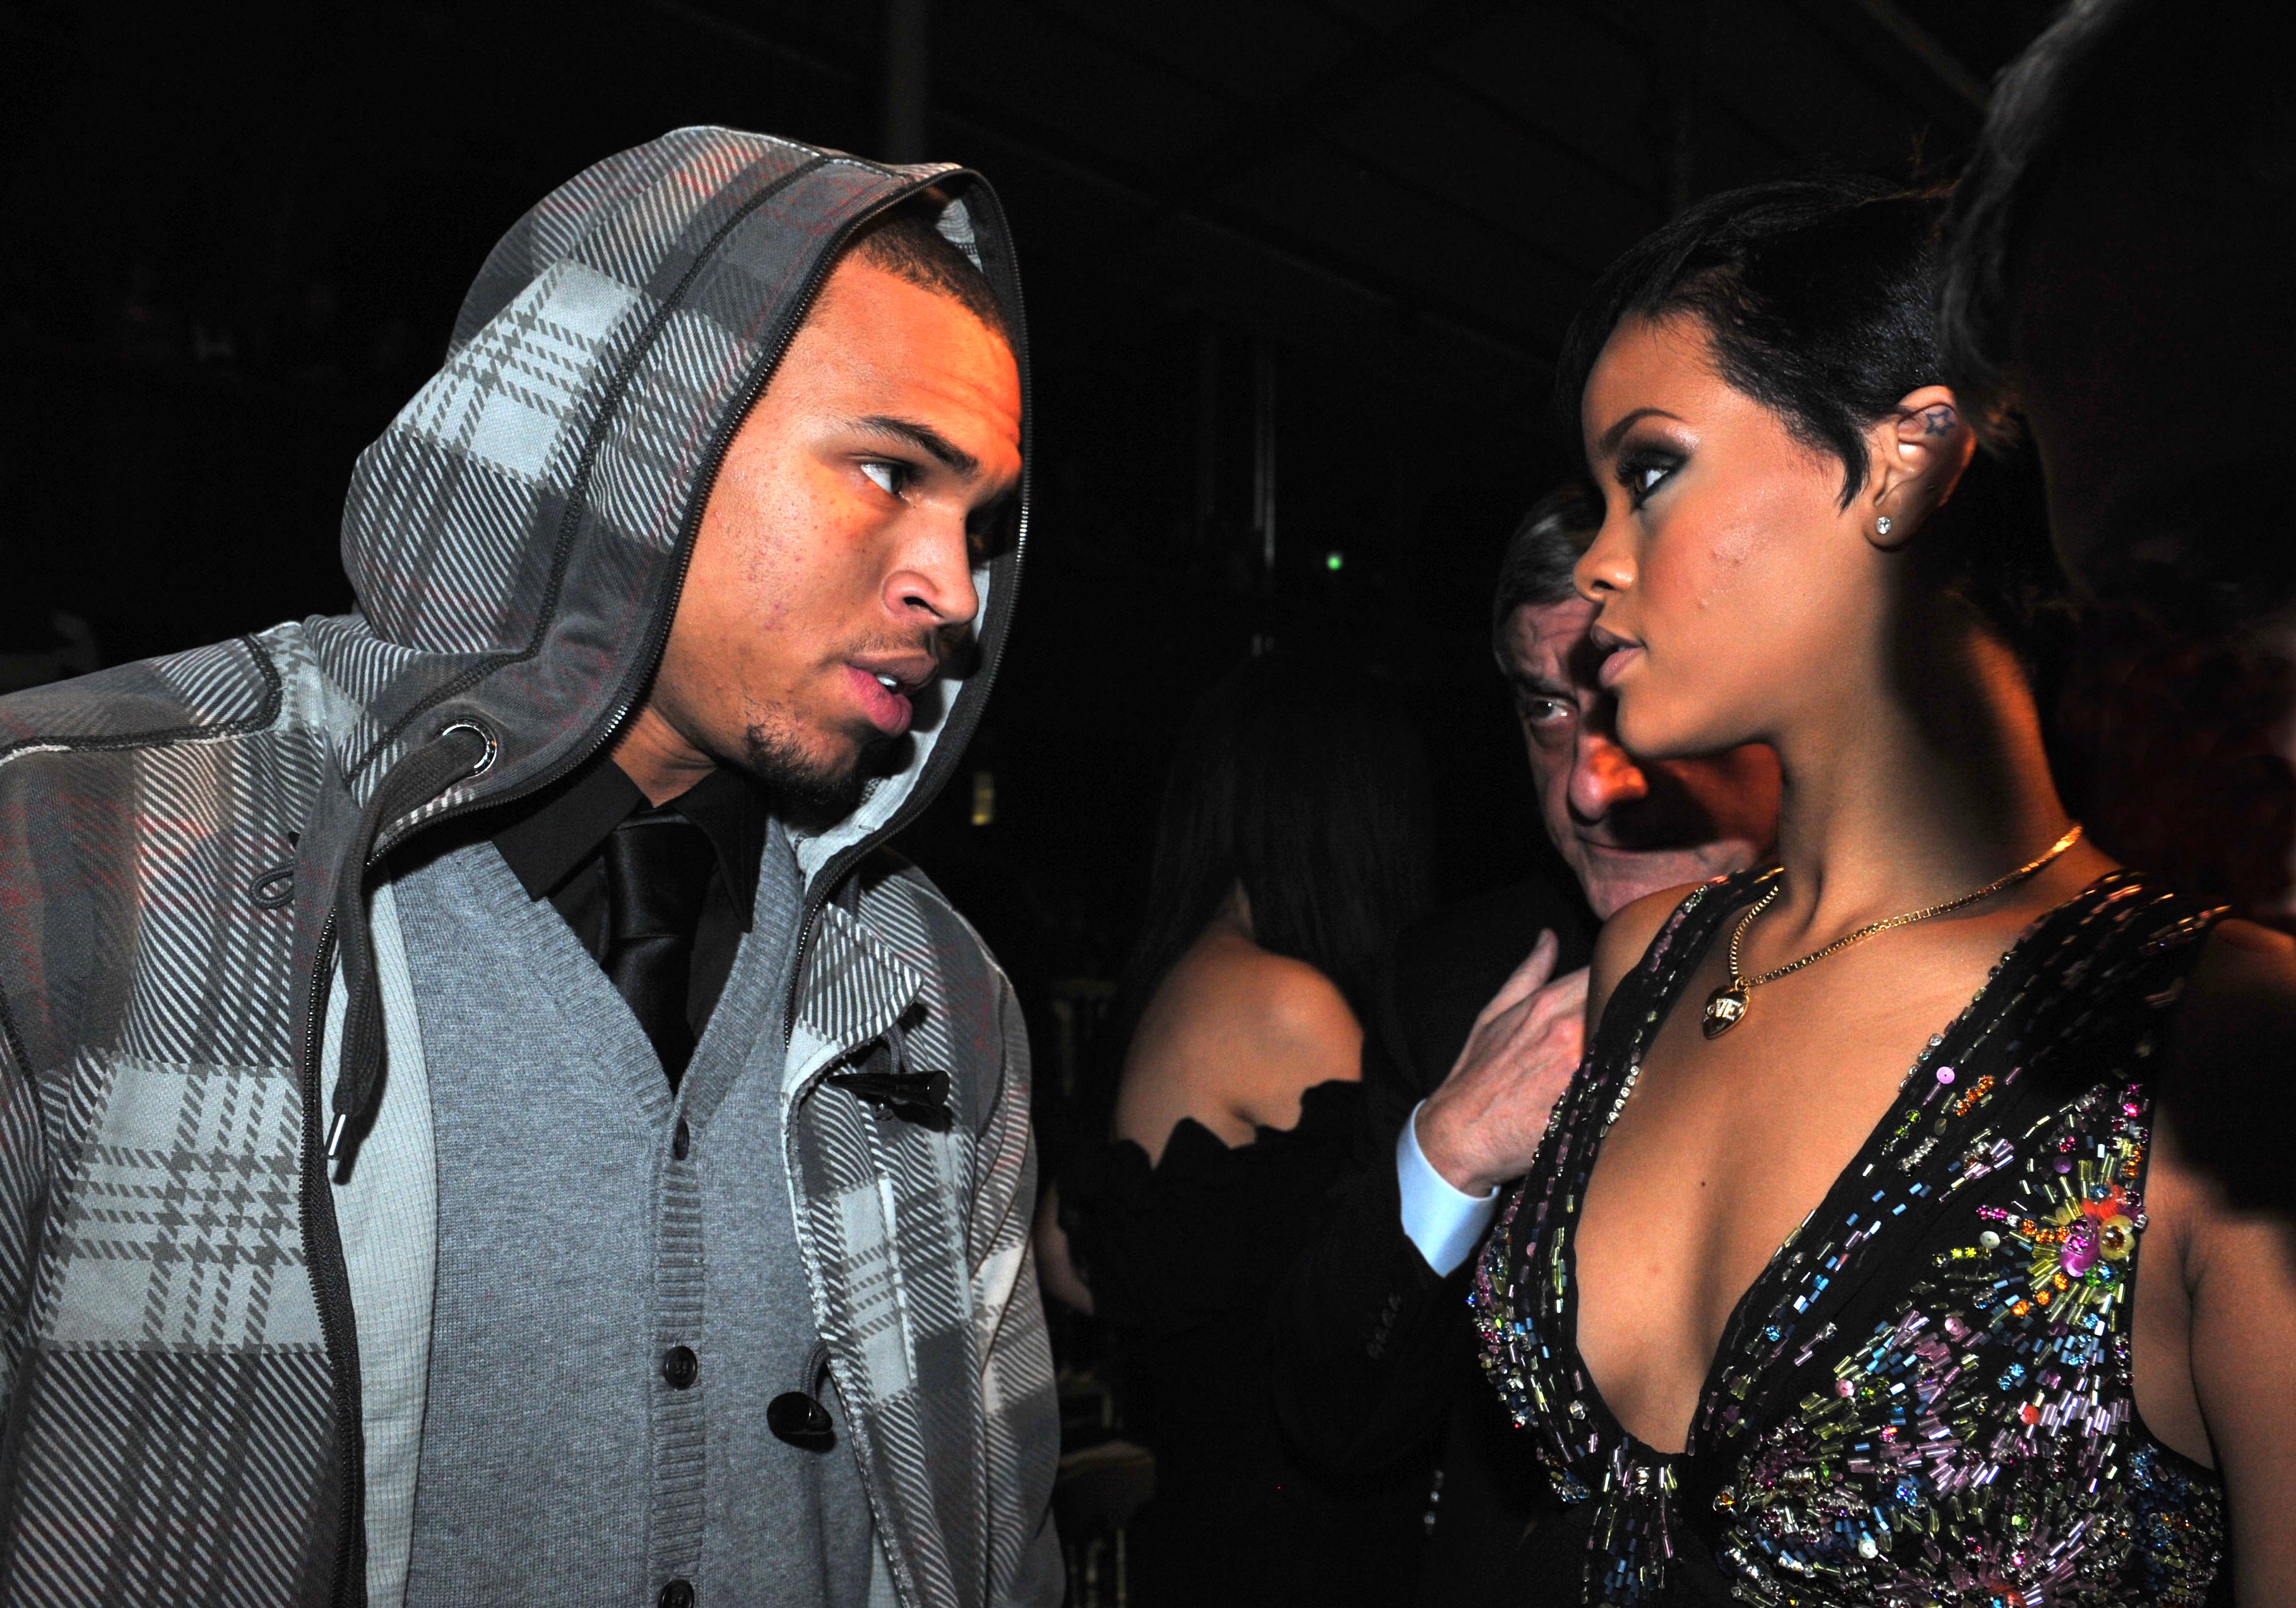 Chris Brown Accused Of "Victim-Blaming" Rihanna For Assault By Wo...